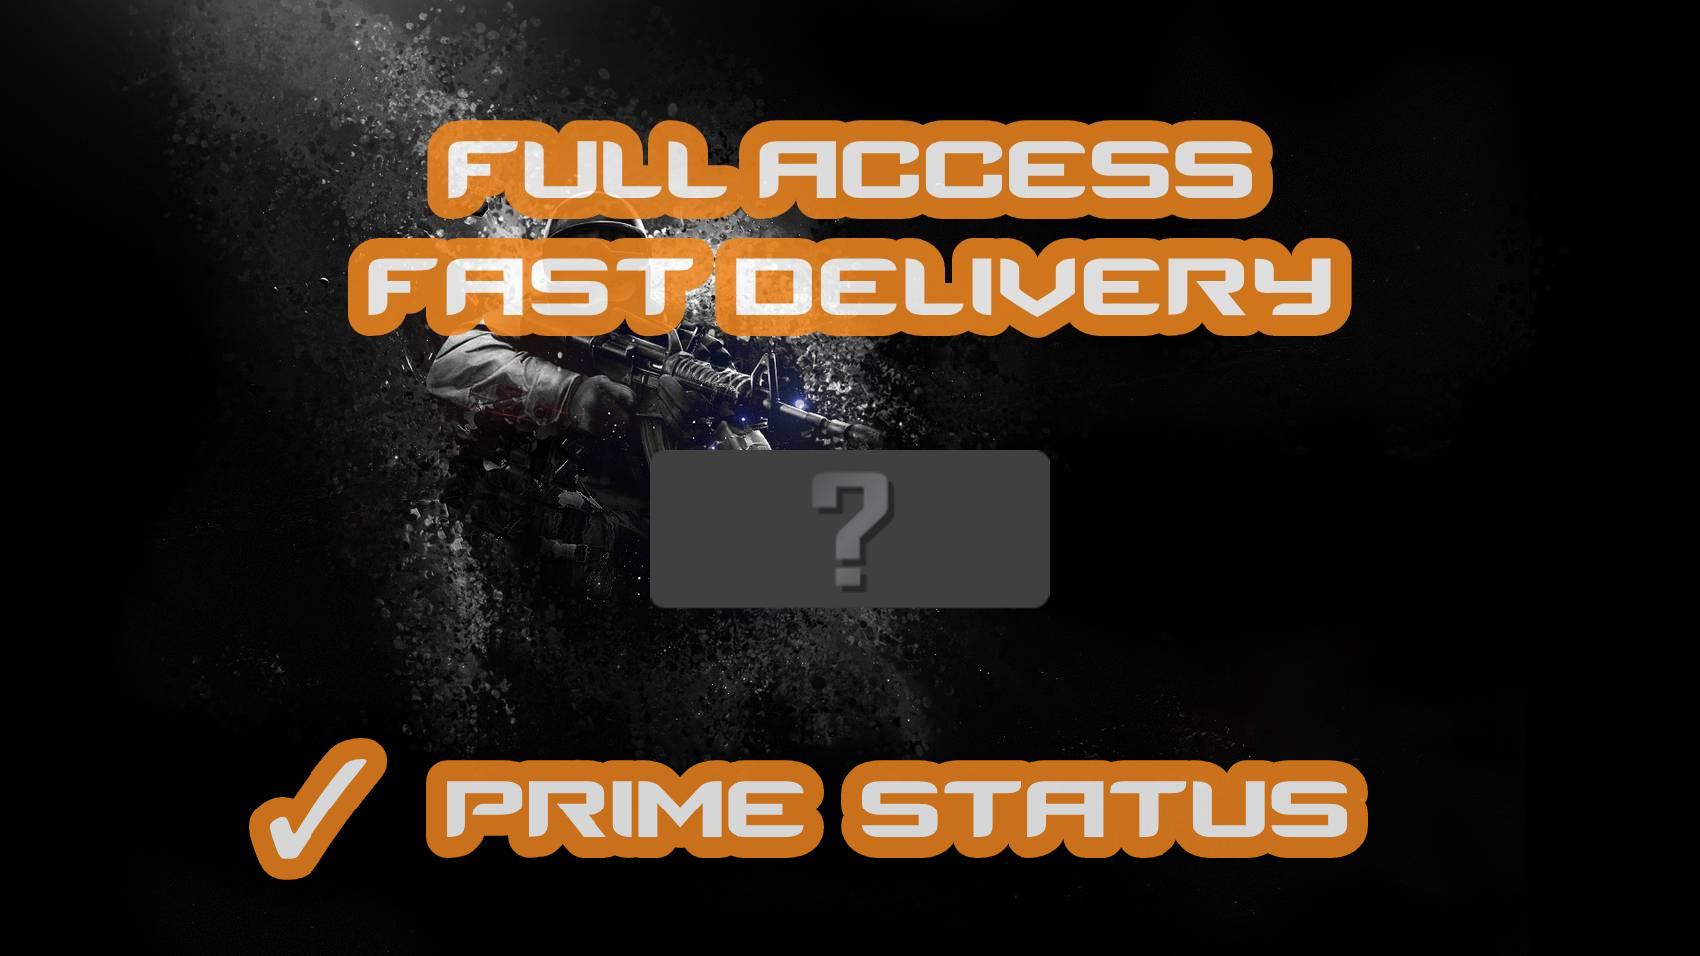 【PRIME】CS:GO Prime Status Upgrade/0 HOURS PLAYED/ORIGINAL PRODUCT/UNRANKED/No Previous Owner/No Transactions